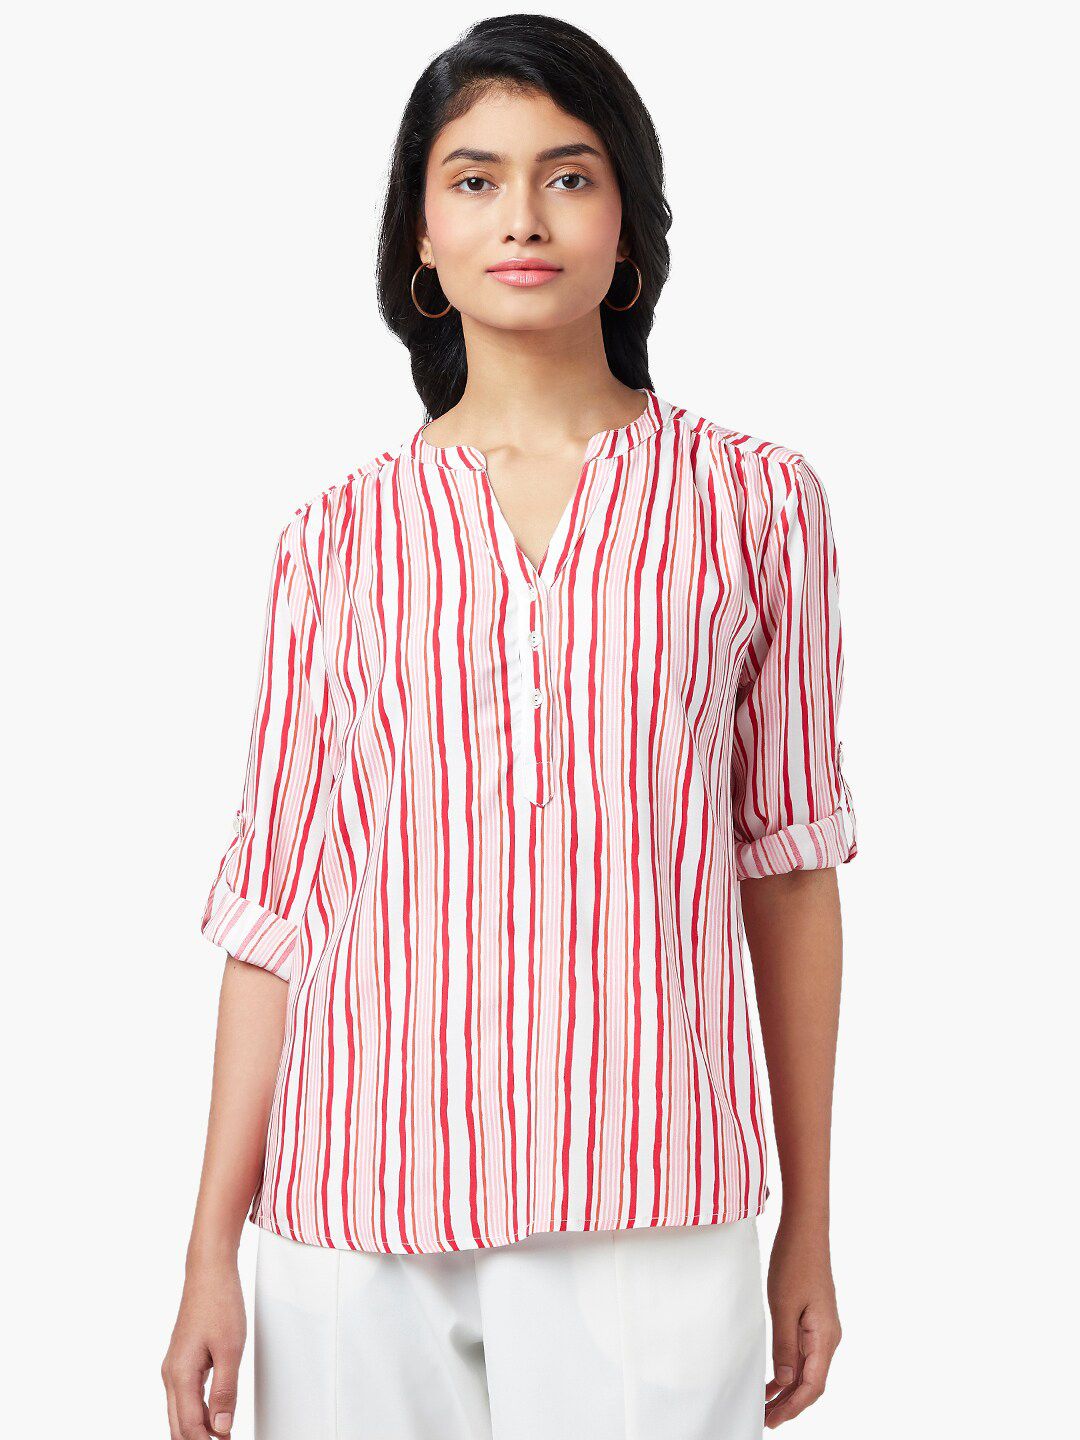 Honey by Pantaloons Striped Mandarin Collar Roll-Up Sleeves Top Price in India